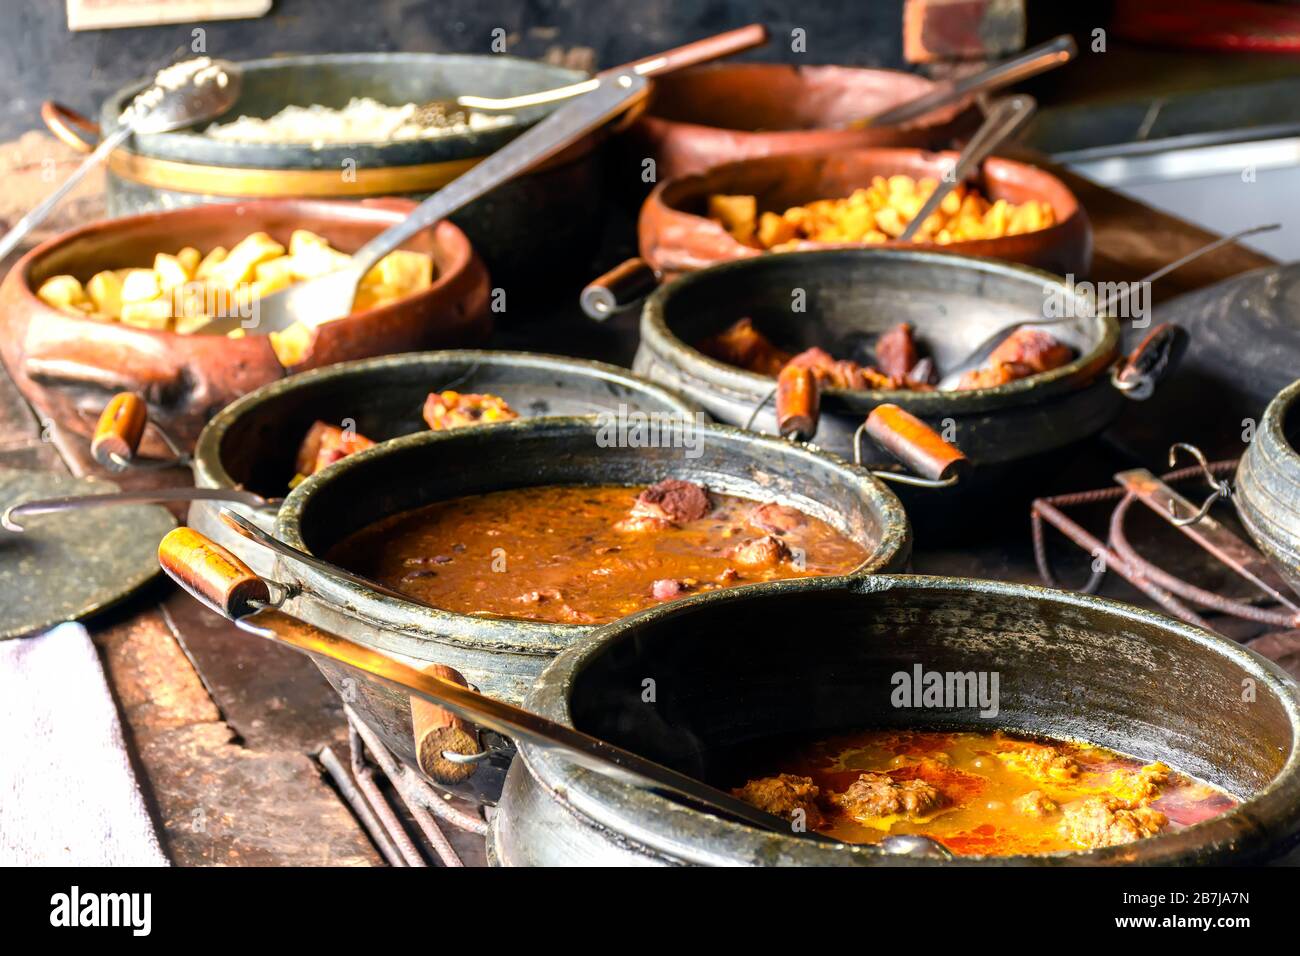 Typical Brazilian foods placed in clay pots and on a metal plate of a traditional wood stove Stock Photo